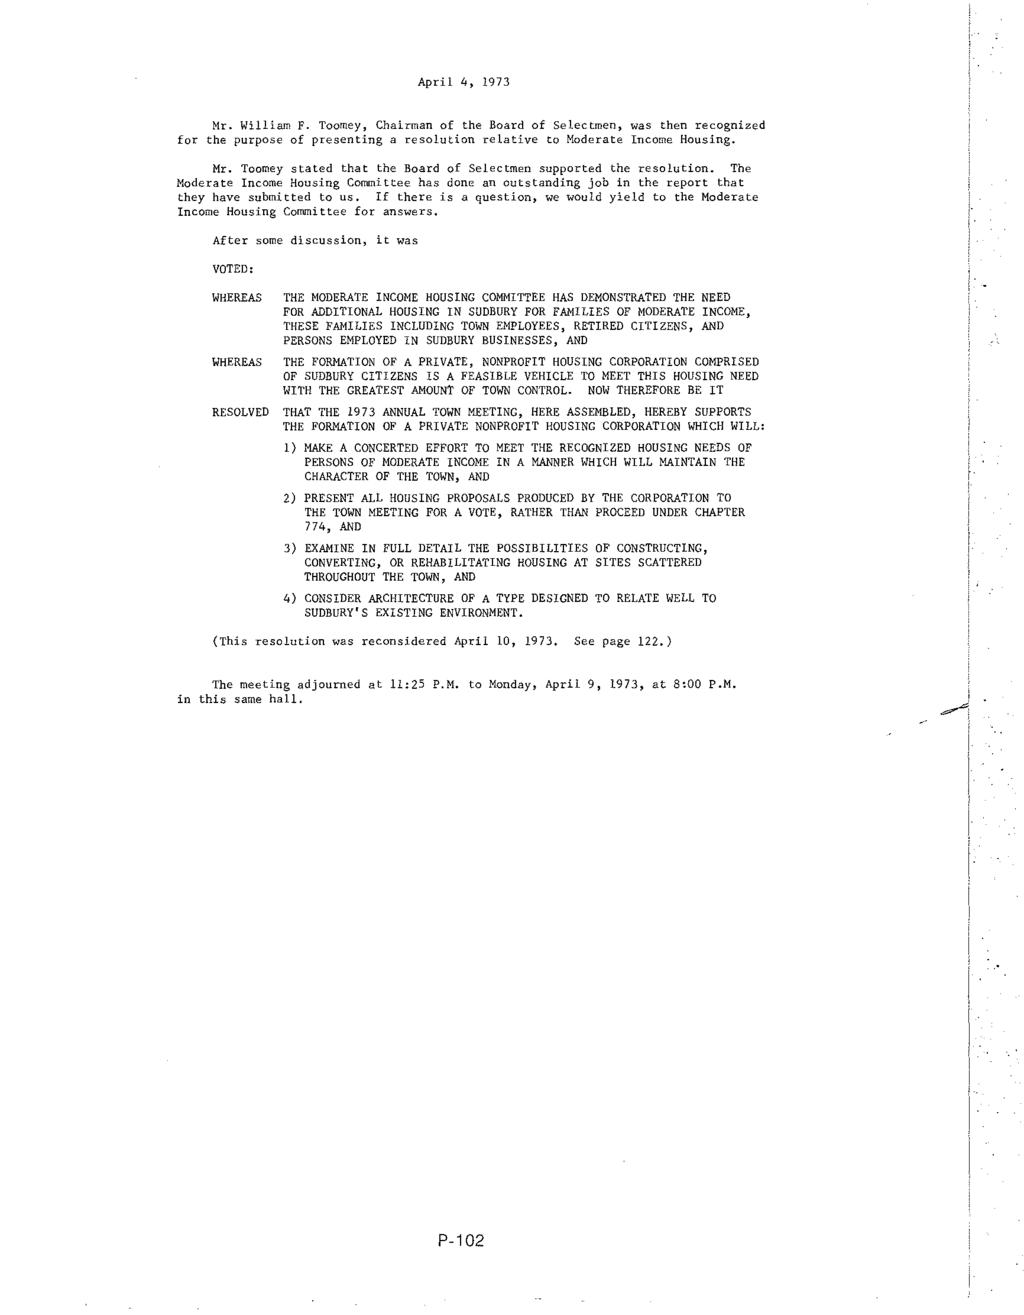 April 4, 1973 Mr. William F. Toomey, Chairman of the Board of Selectmen, was then recognized for the purpose of presenting a resolution relative to Moderate Income Housing. Mr. Toomey stated that the Board of Selectmen supported the resolution.